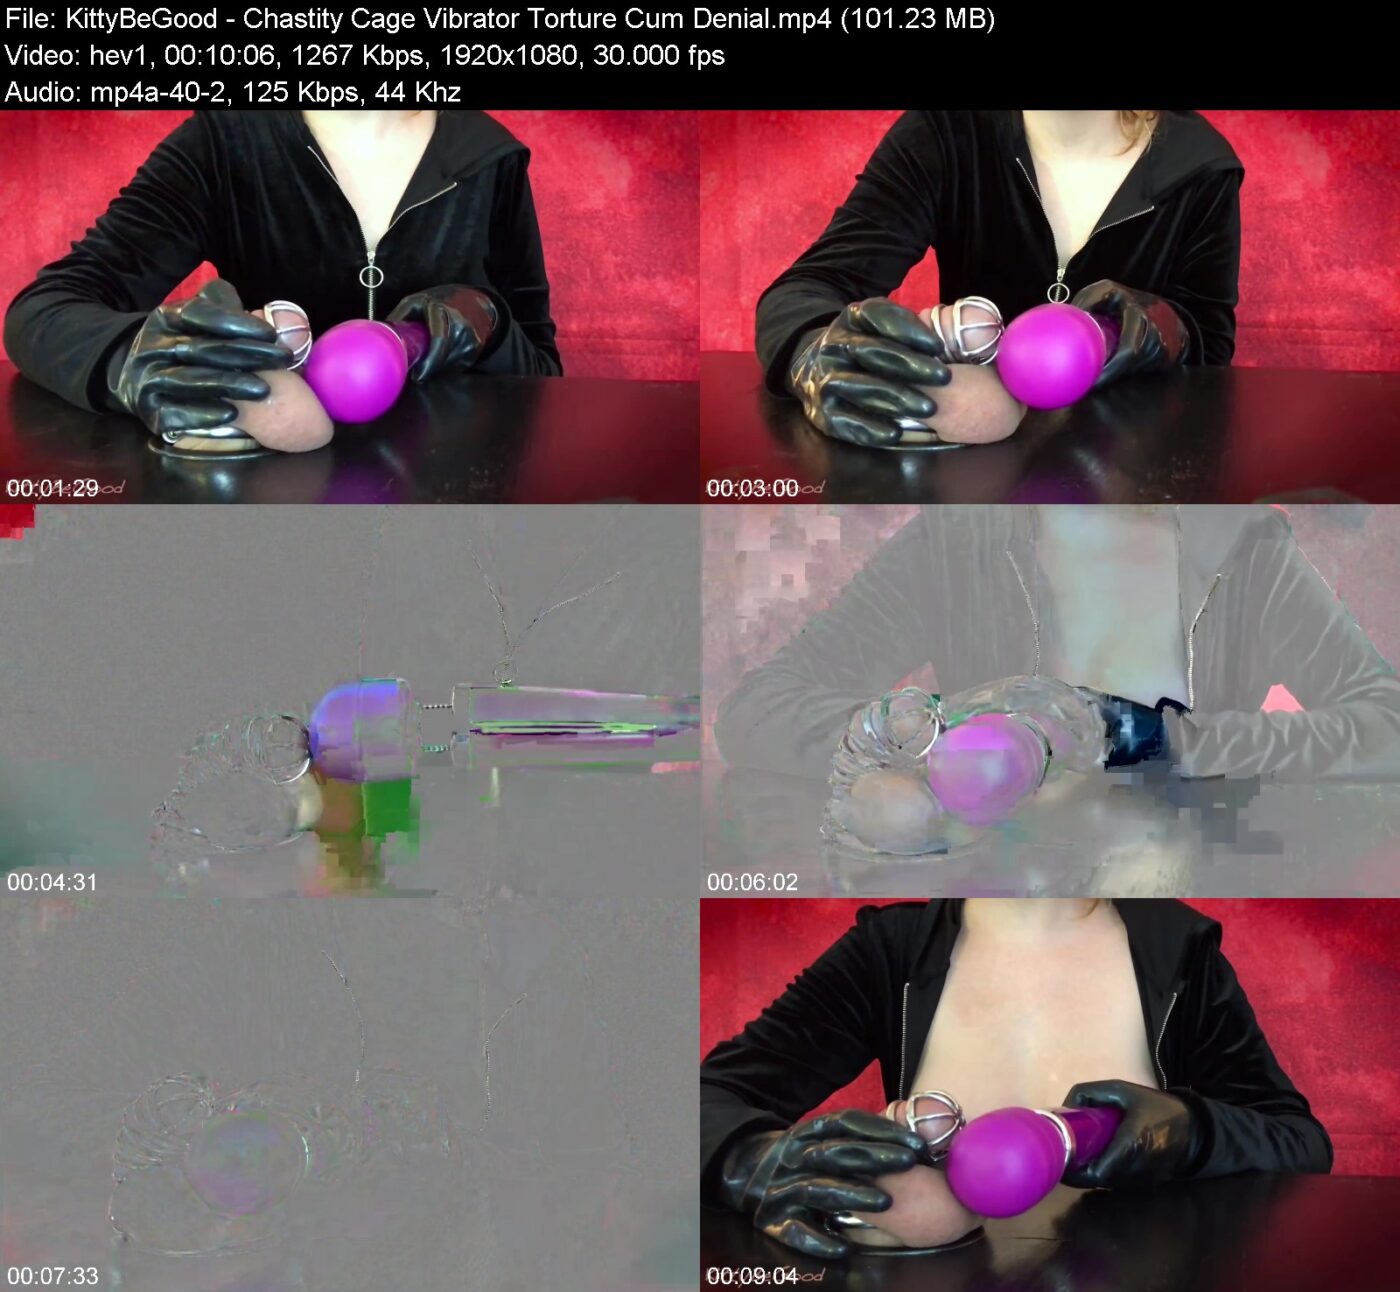 Actress: KittyBeGood. Title and Studio: Chastity Cage Vibrator Torture Cum Denial